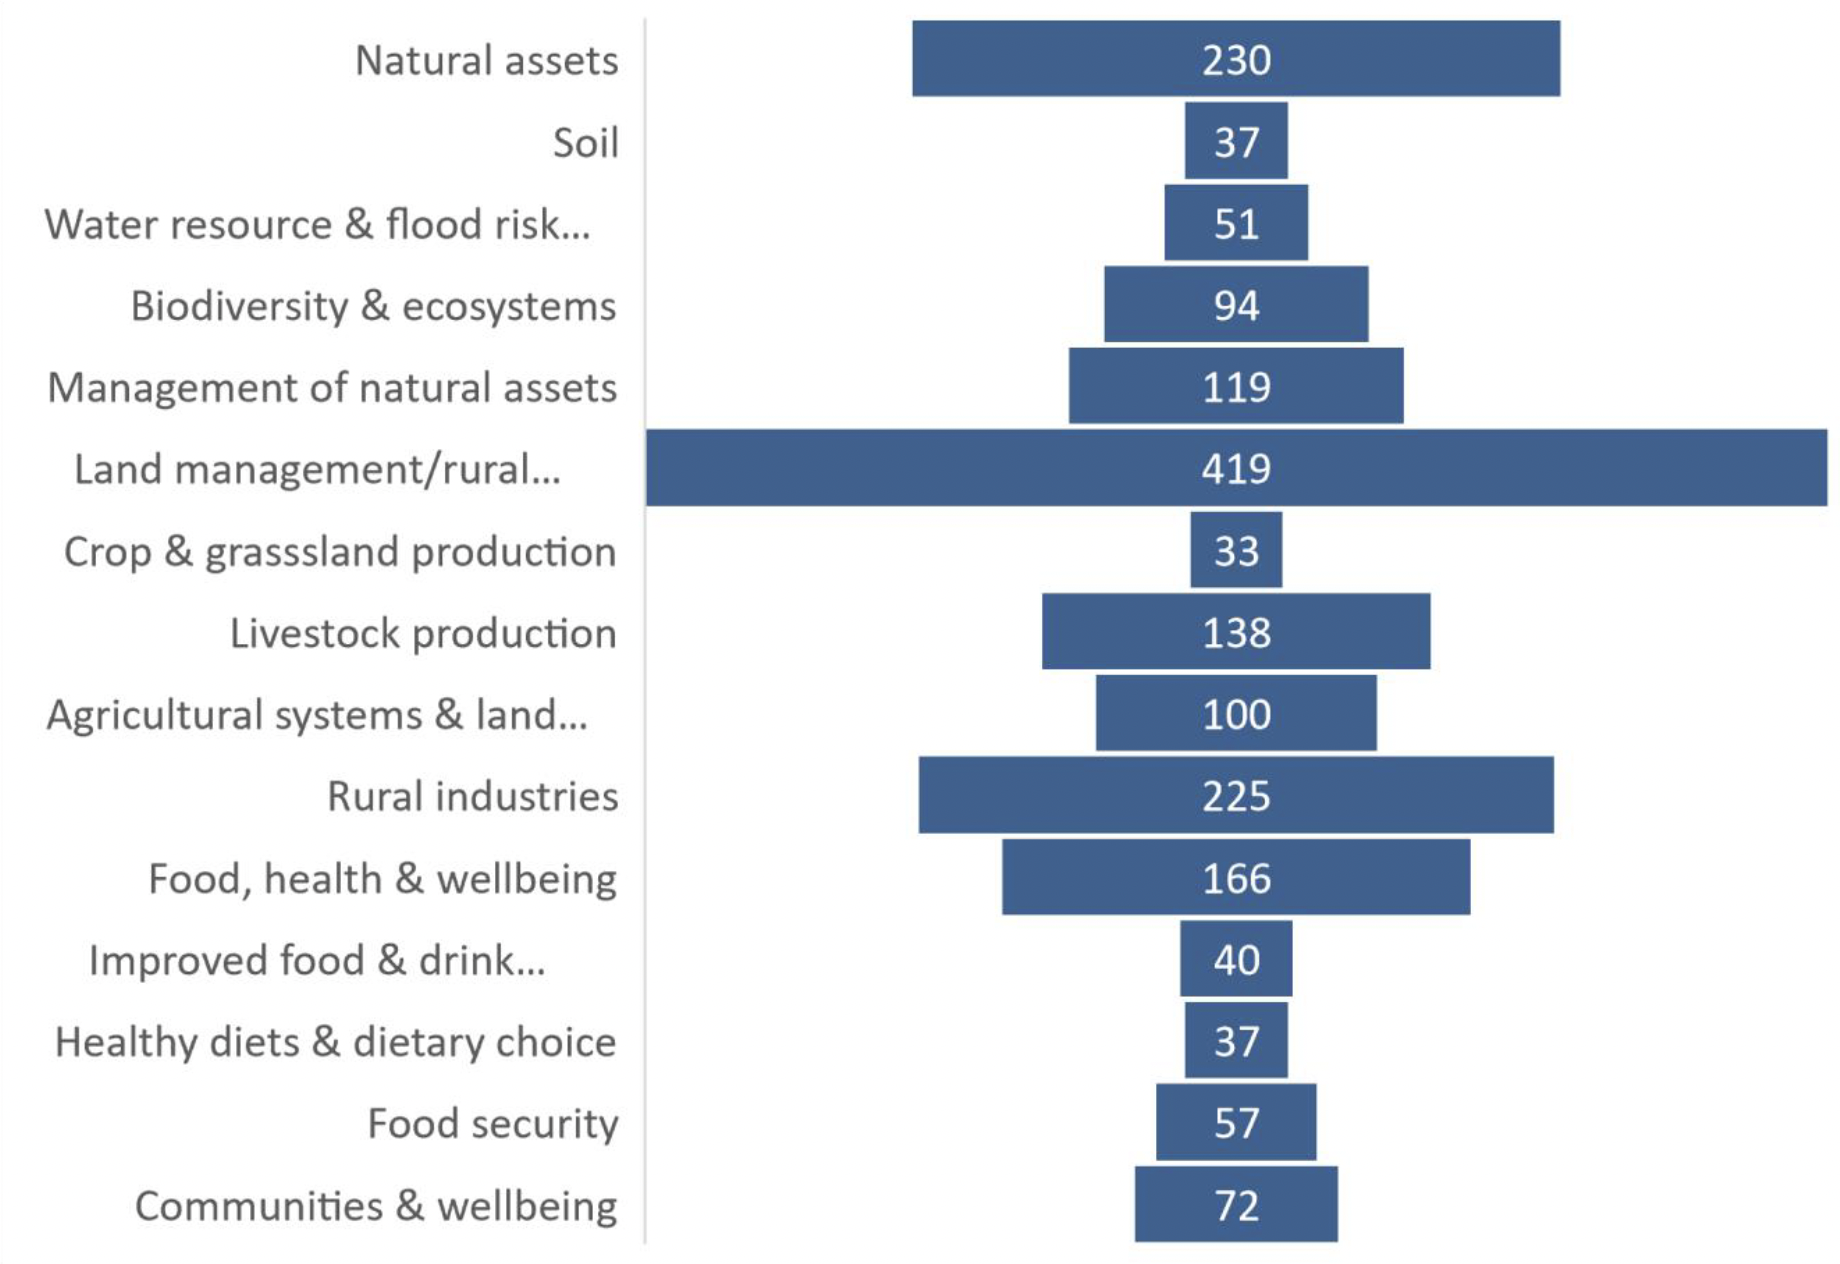 Figure showing the number of policy outputs related to each of the three themes of the SRP across the lifetime of the programme. Land management and rural economies had 419 attributed policy outputs during this time, natural assets had 230, and food, health and wellbeing had 166.